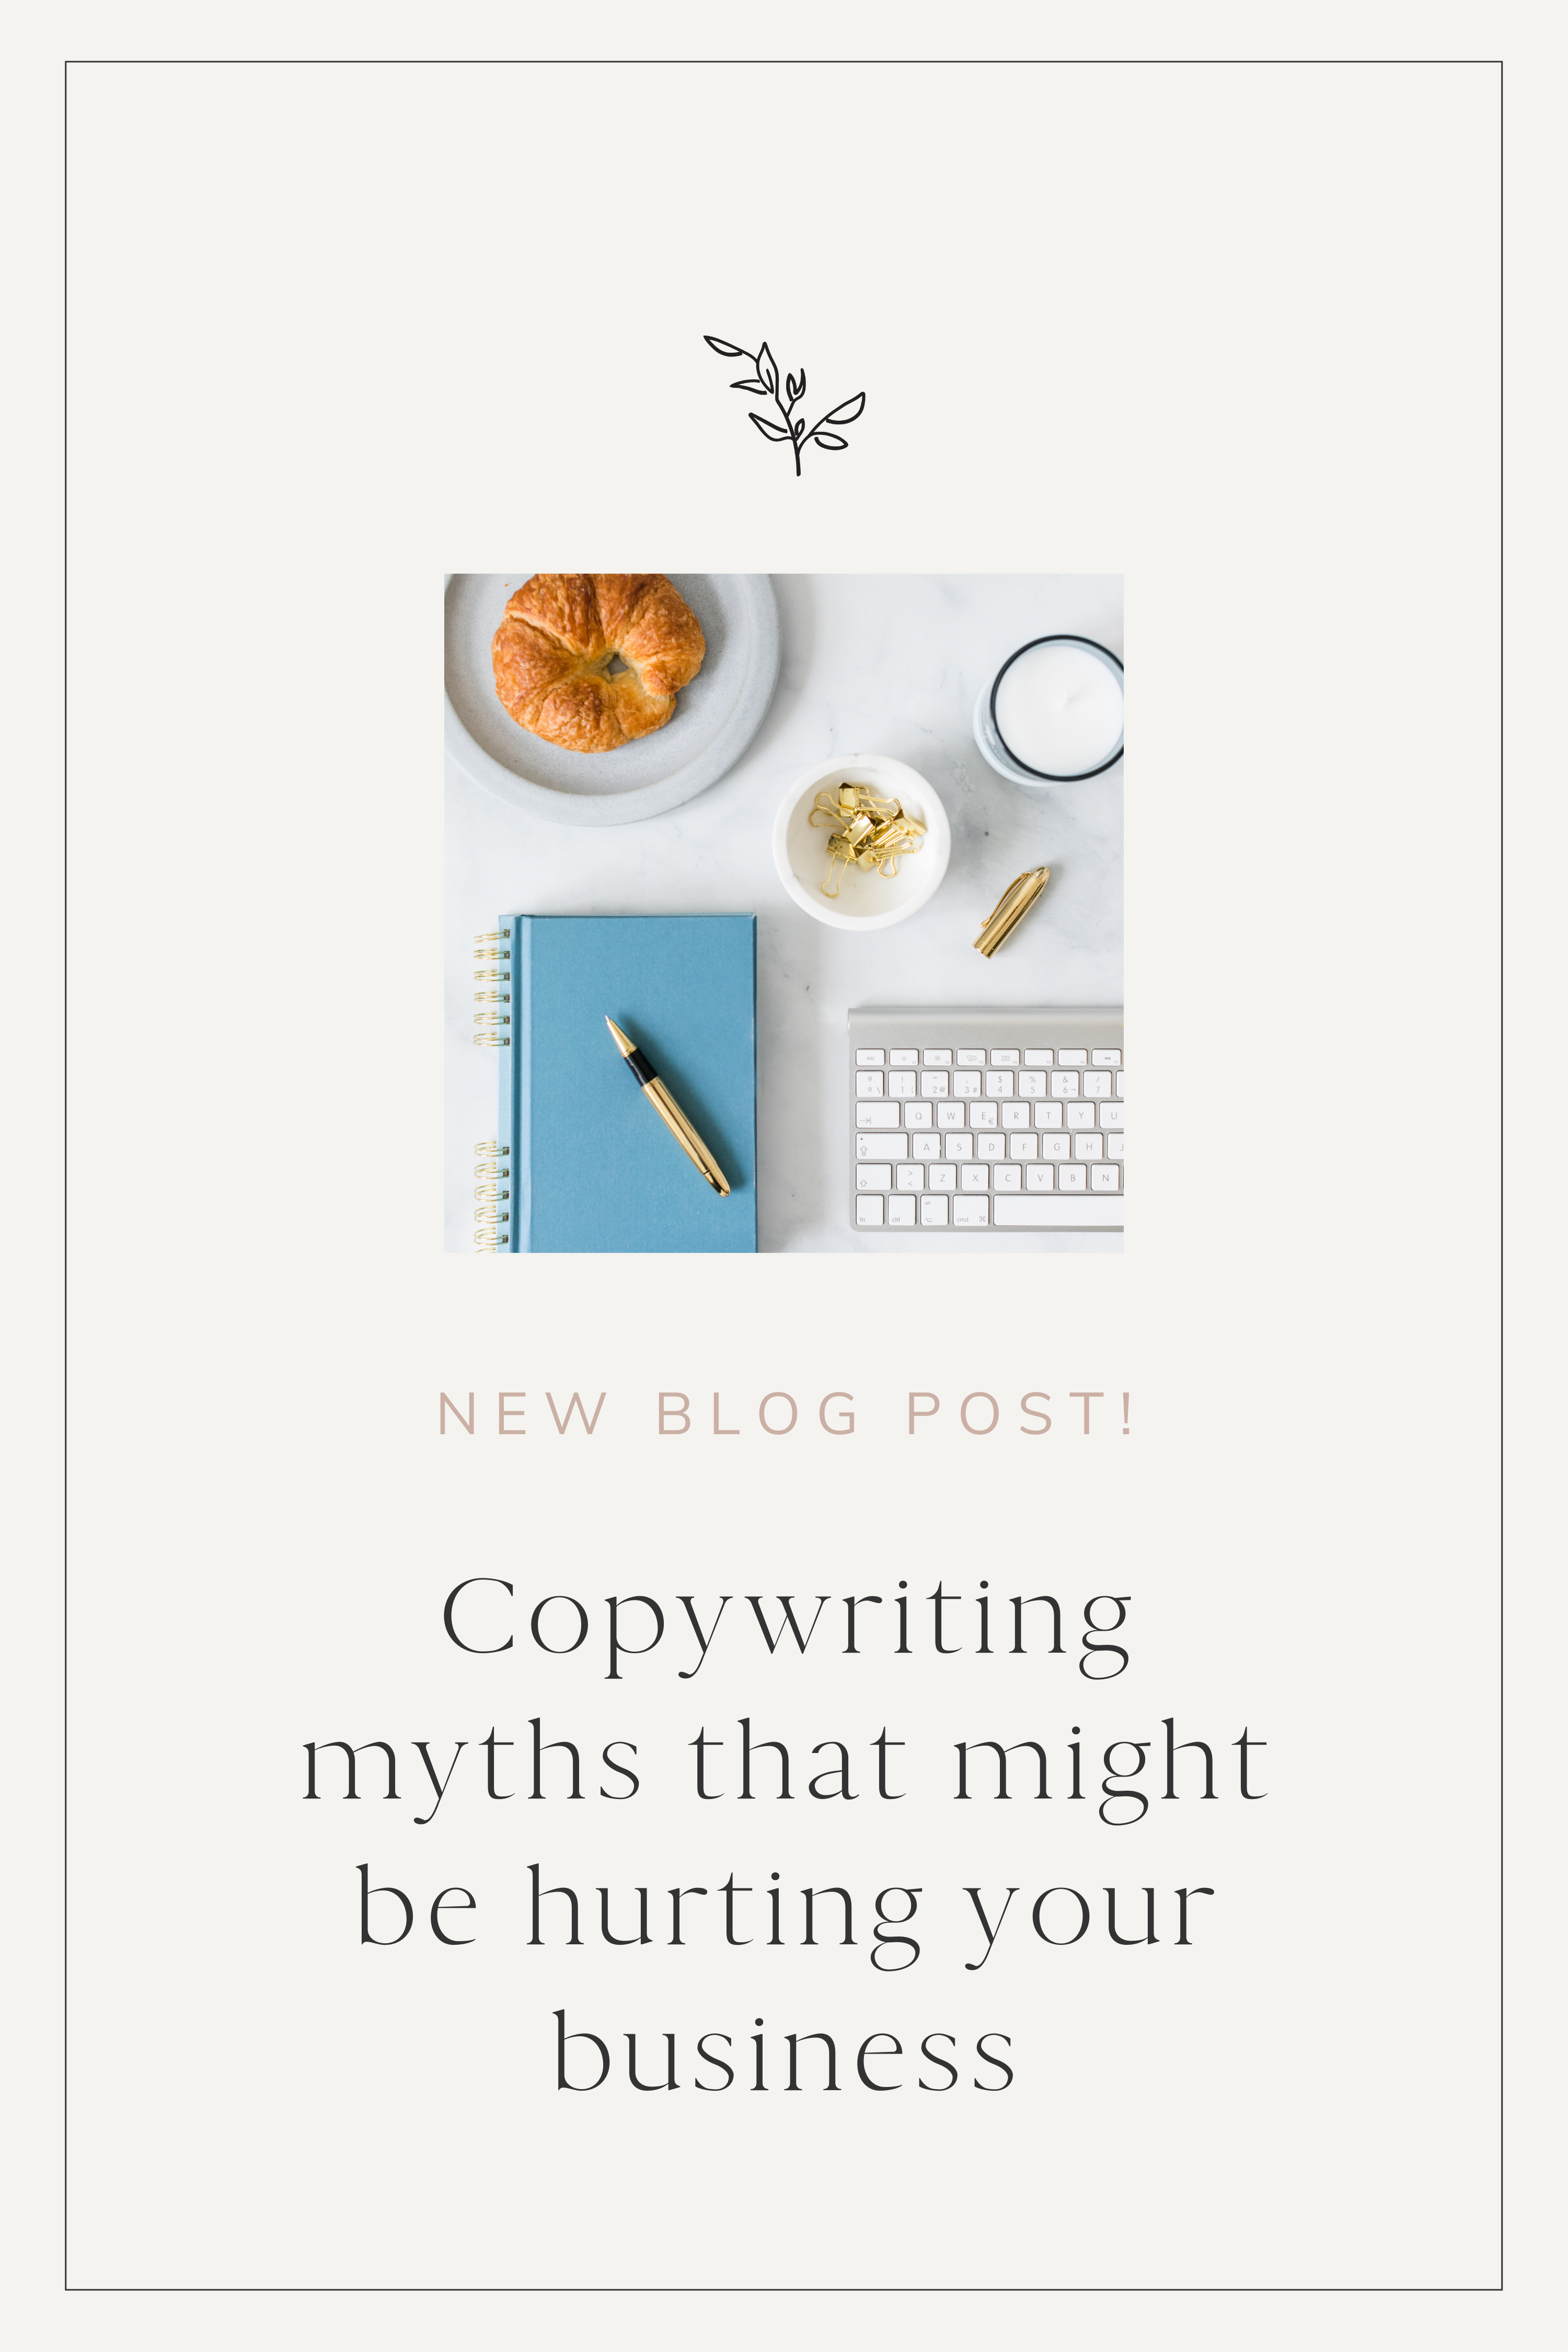 Copywriting myths that might be hurting your business